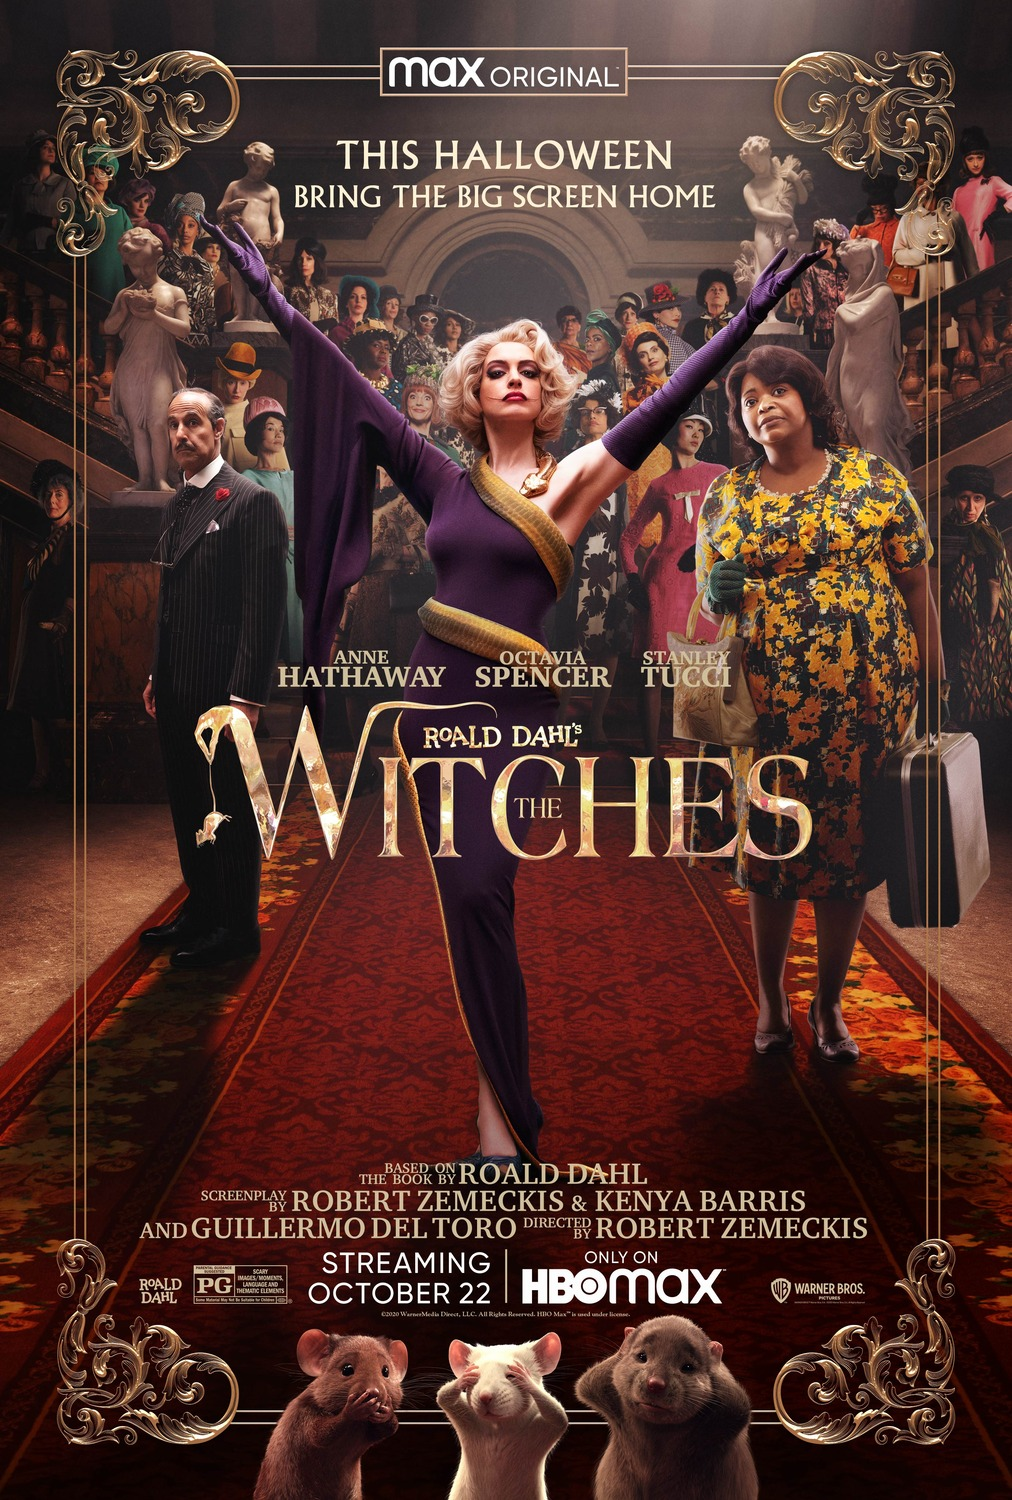 The Witches (2020 film) Warner Bros picture